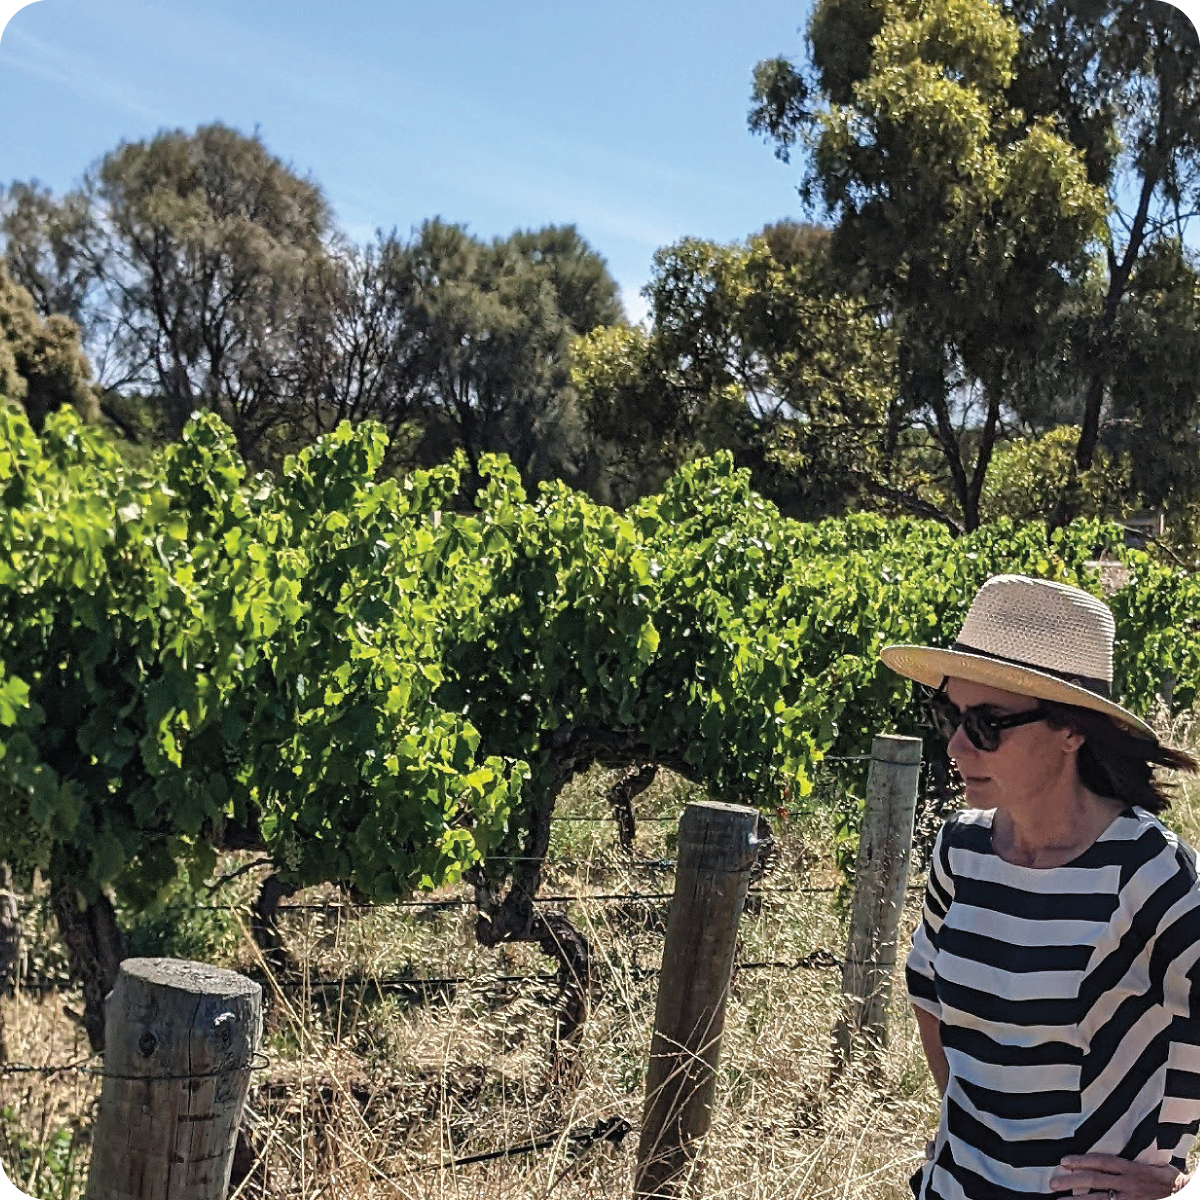 About Grant Nash Wines